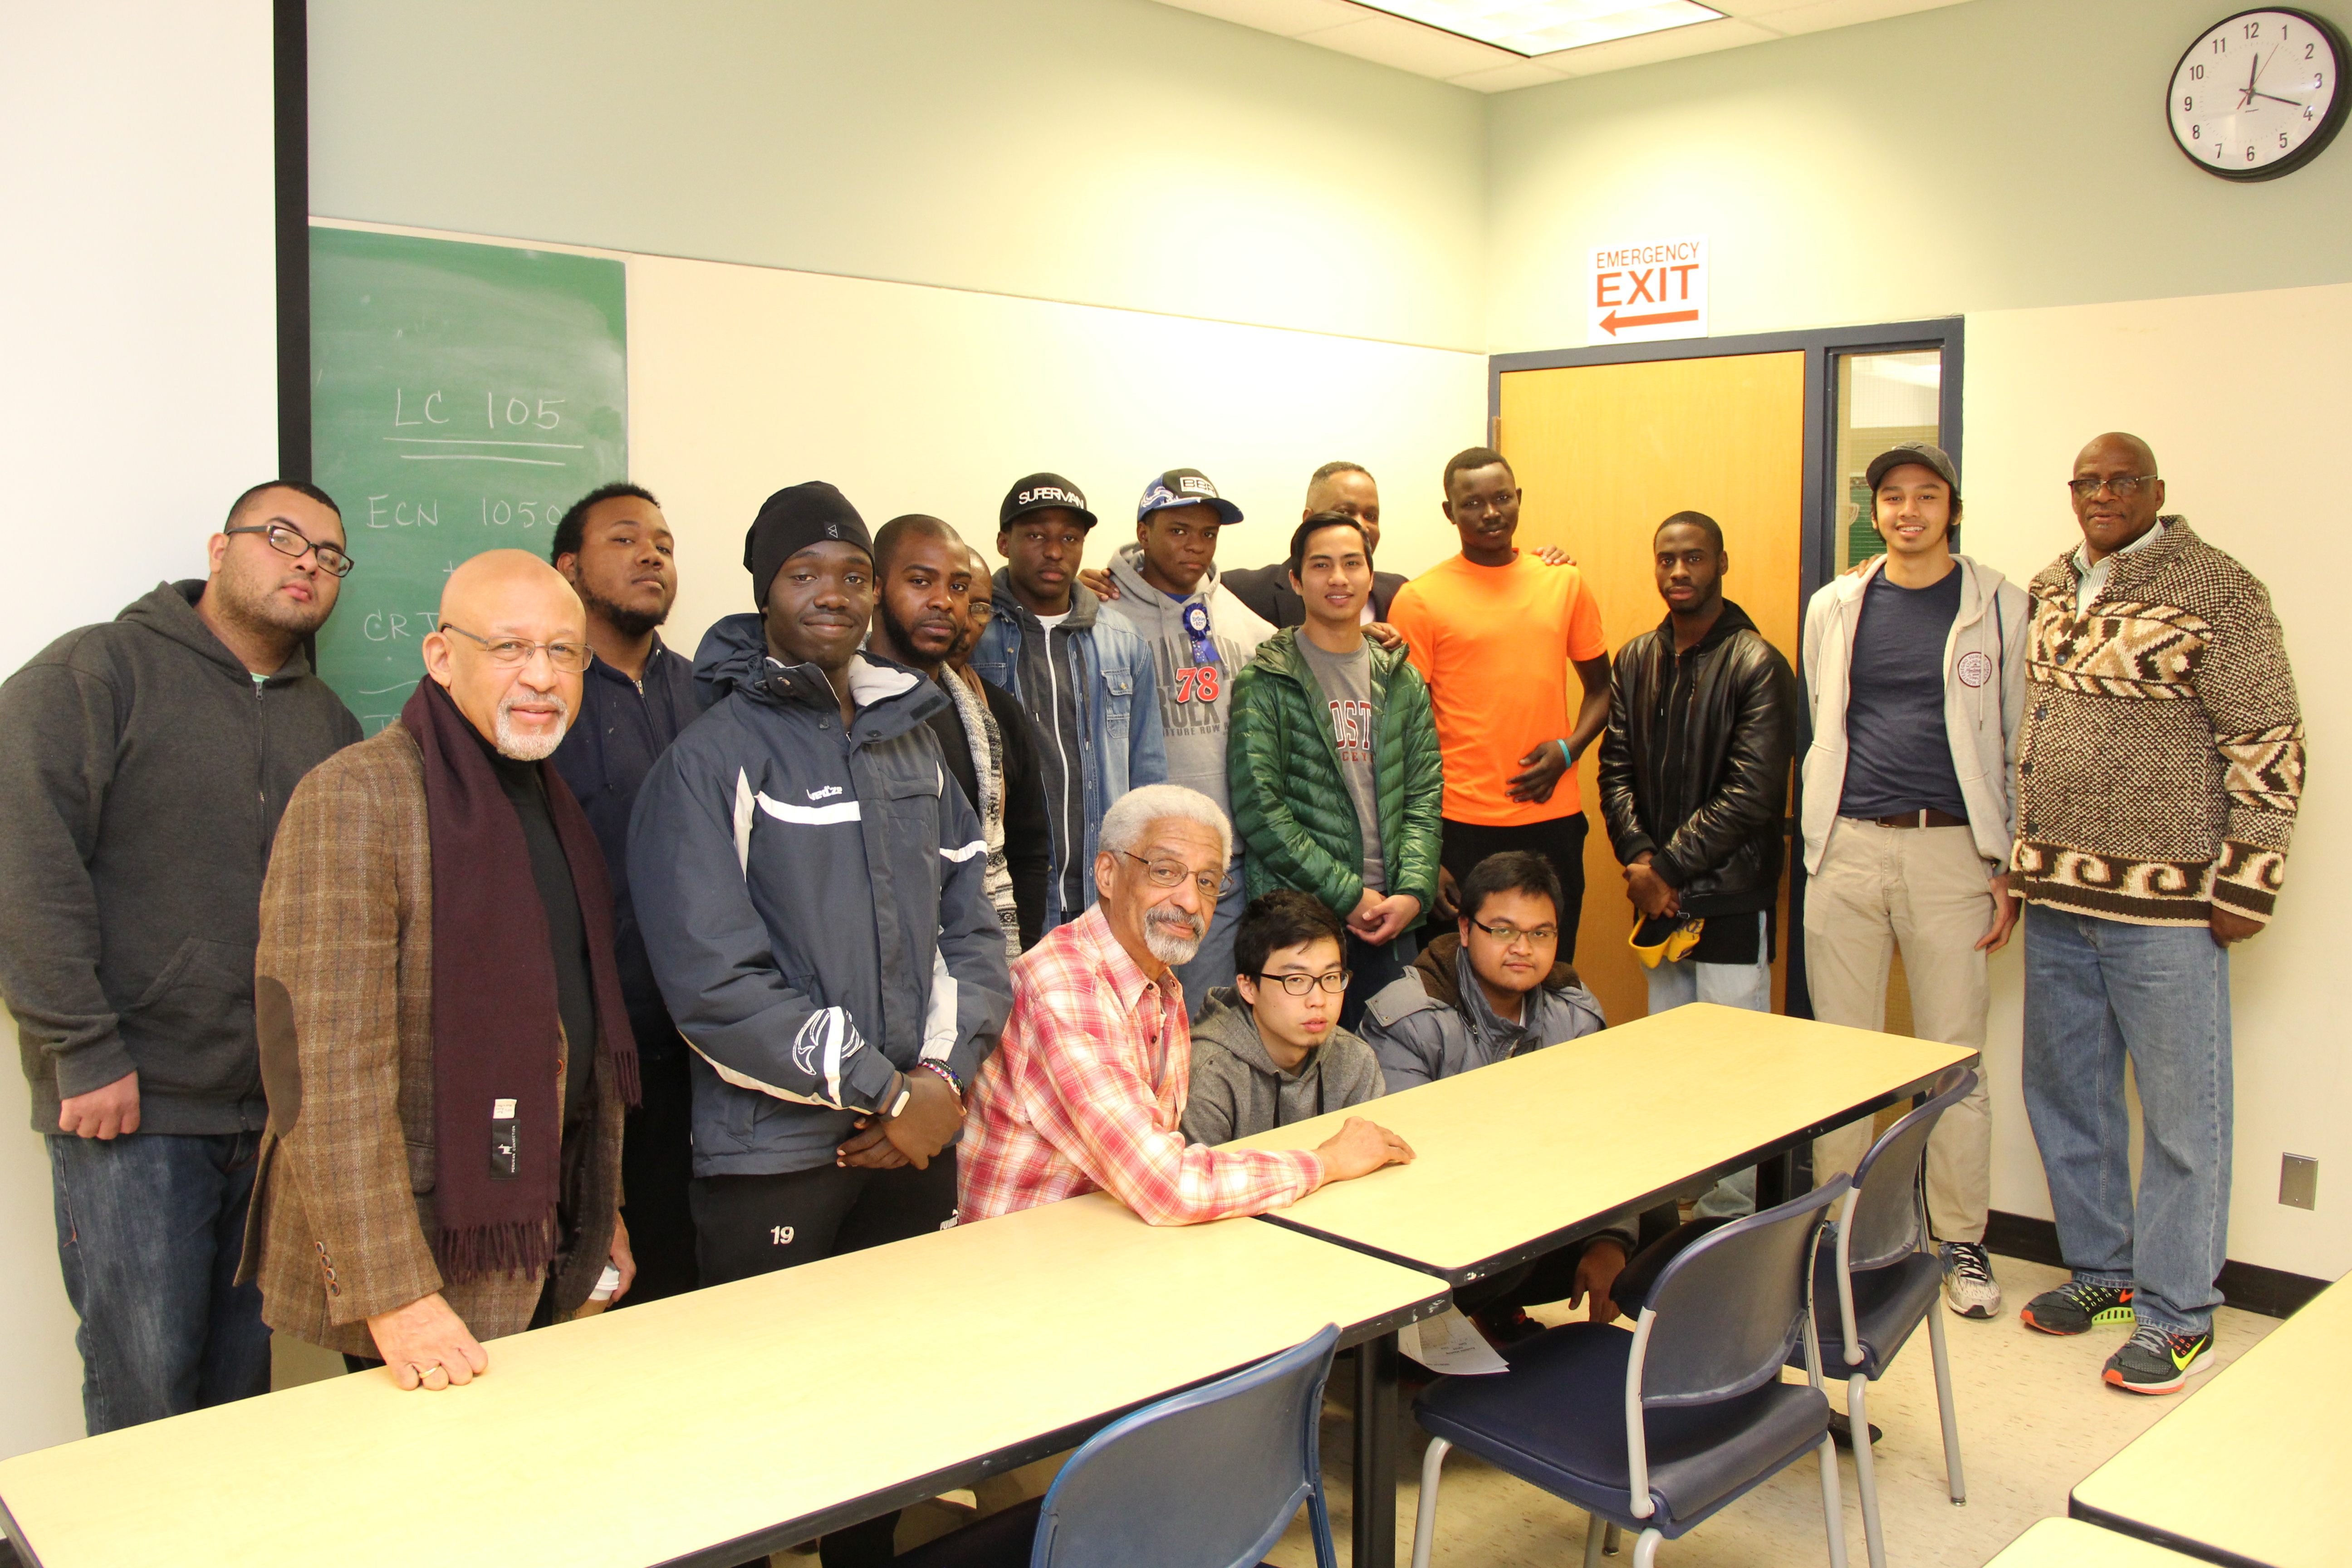 Holyoke Community College's ALANA Men in Motion program provides academic support, mentoring, counseling and career planning guidance to African American, Latino, Asian and Native American men.